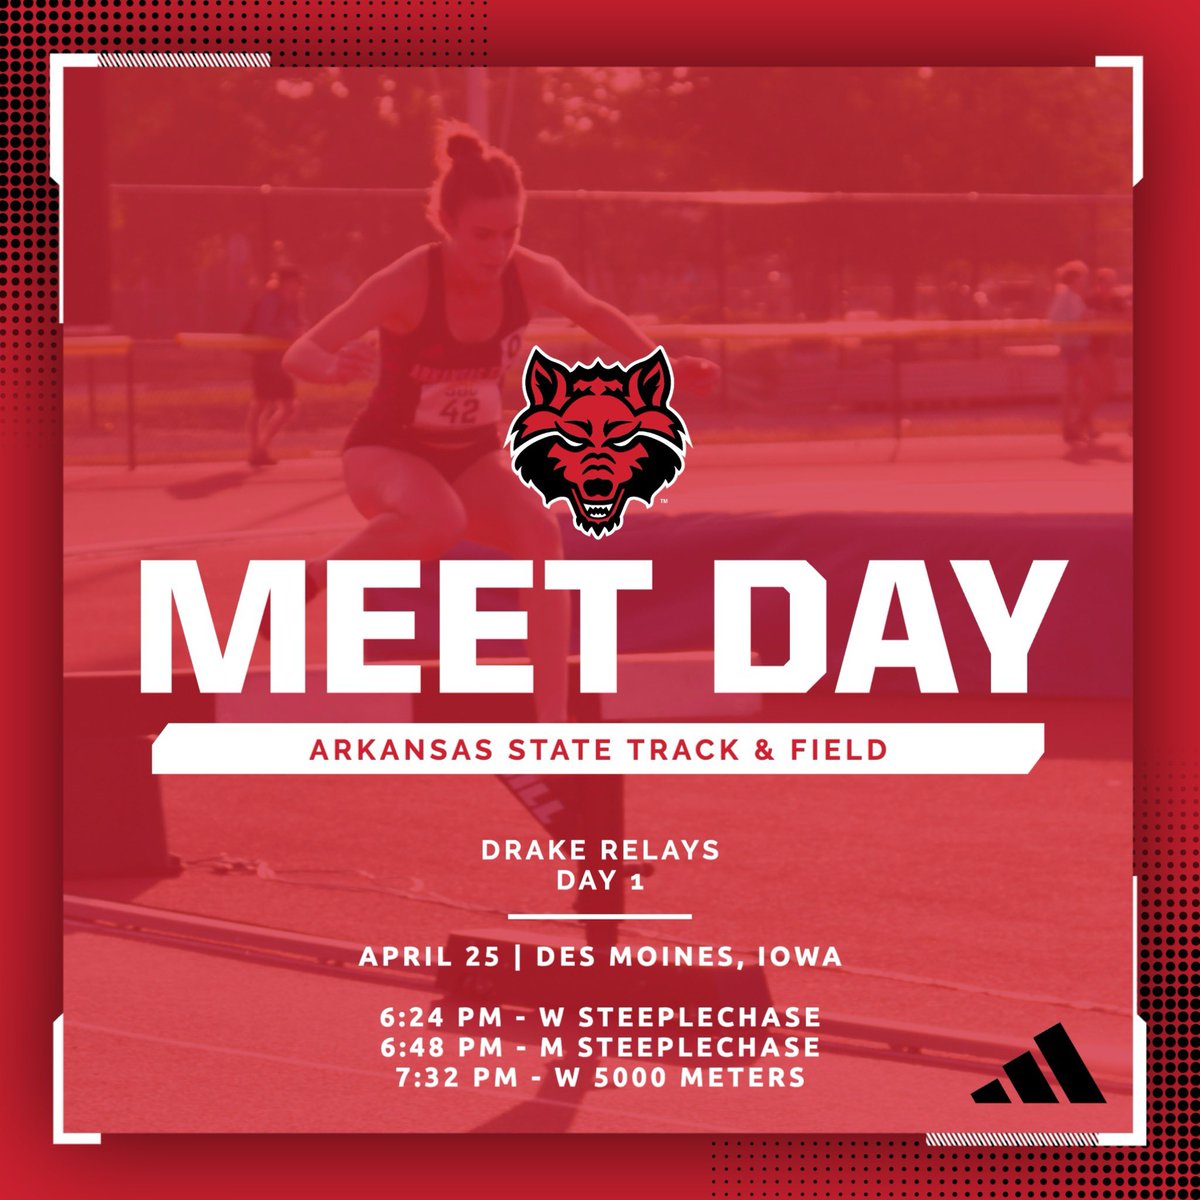 Getting the week started tonight at the Drake Relays with a few distance races! 📊 results.drakerelays.us #WolvesUp